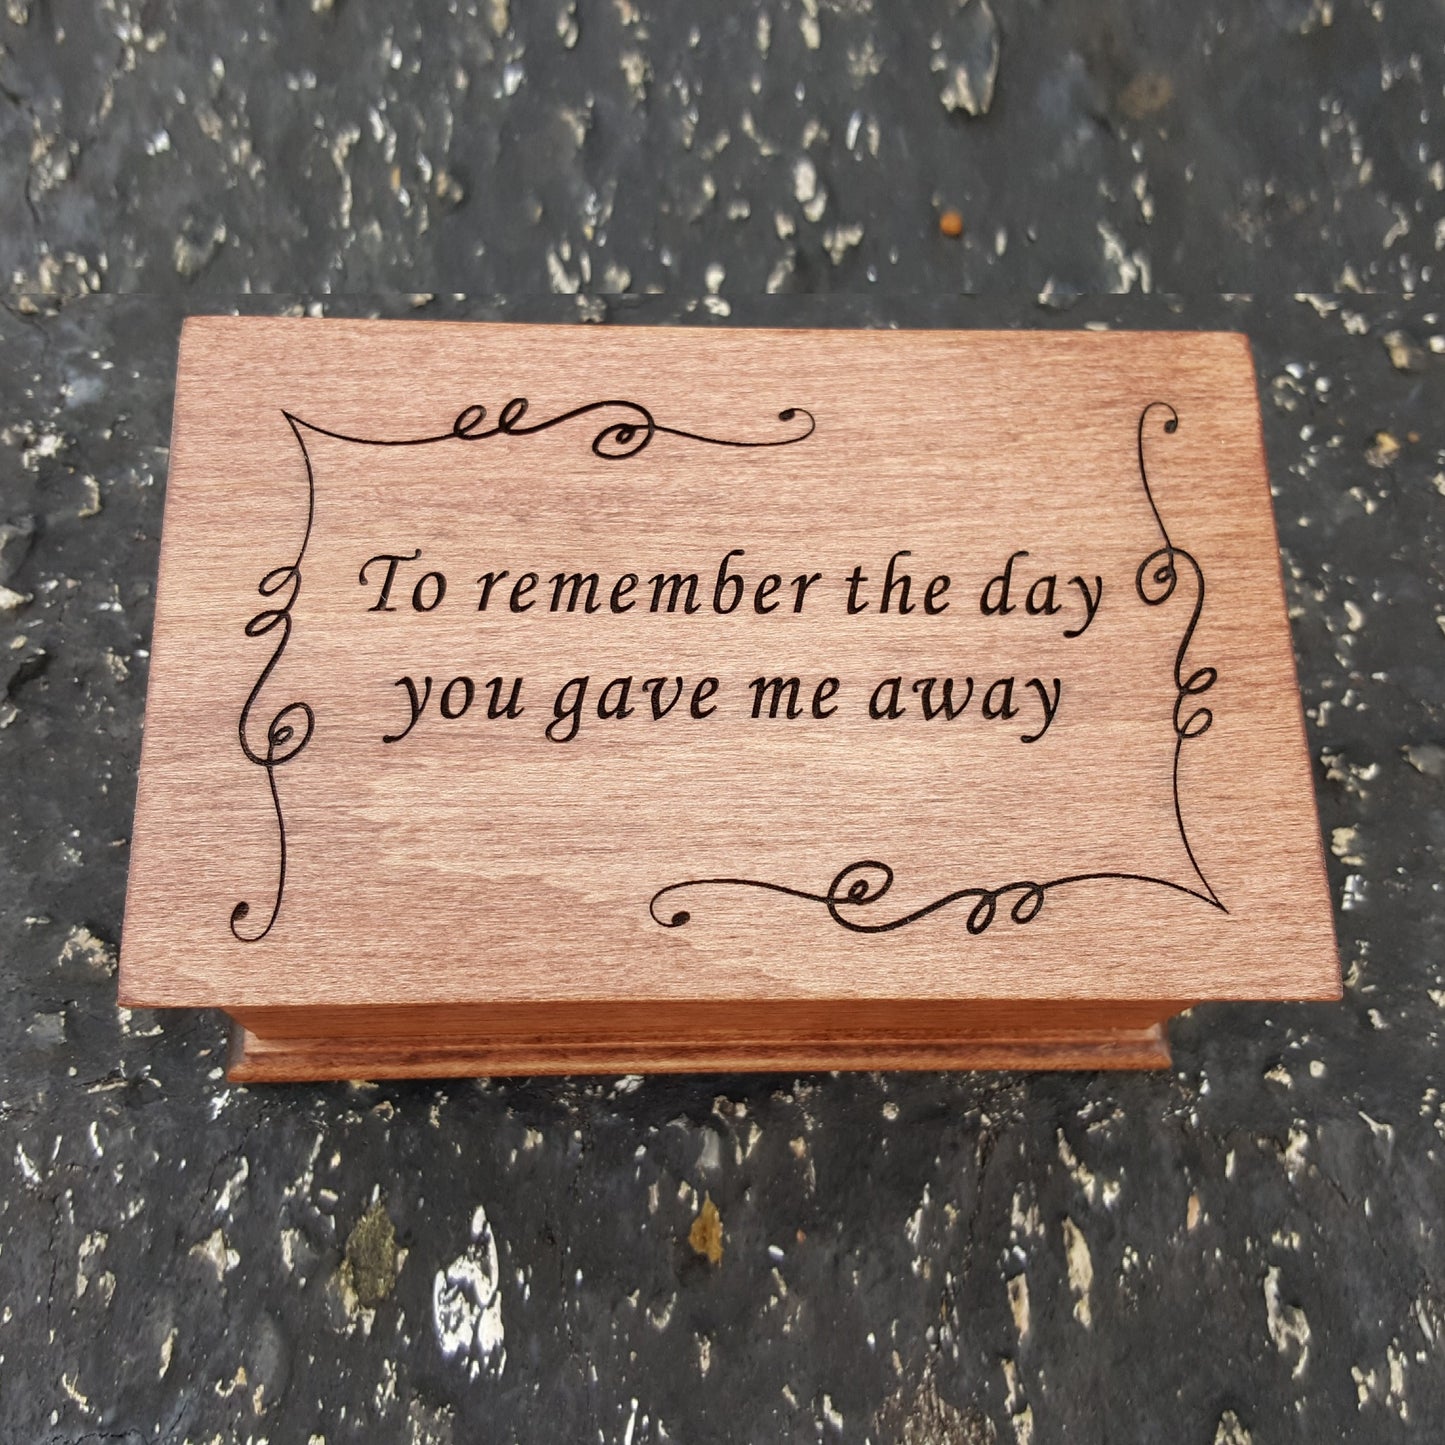 To remember the day you gave me away keepsake box